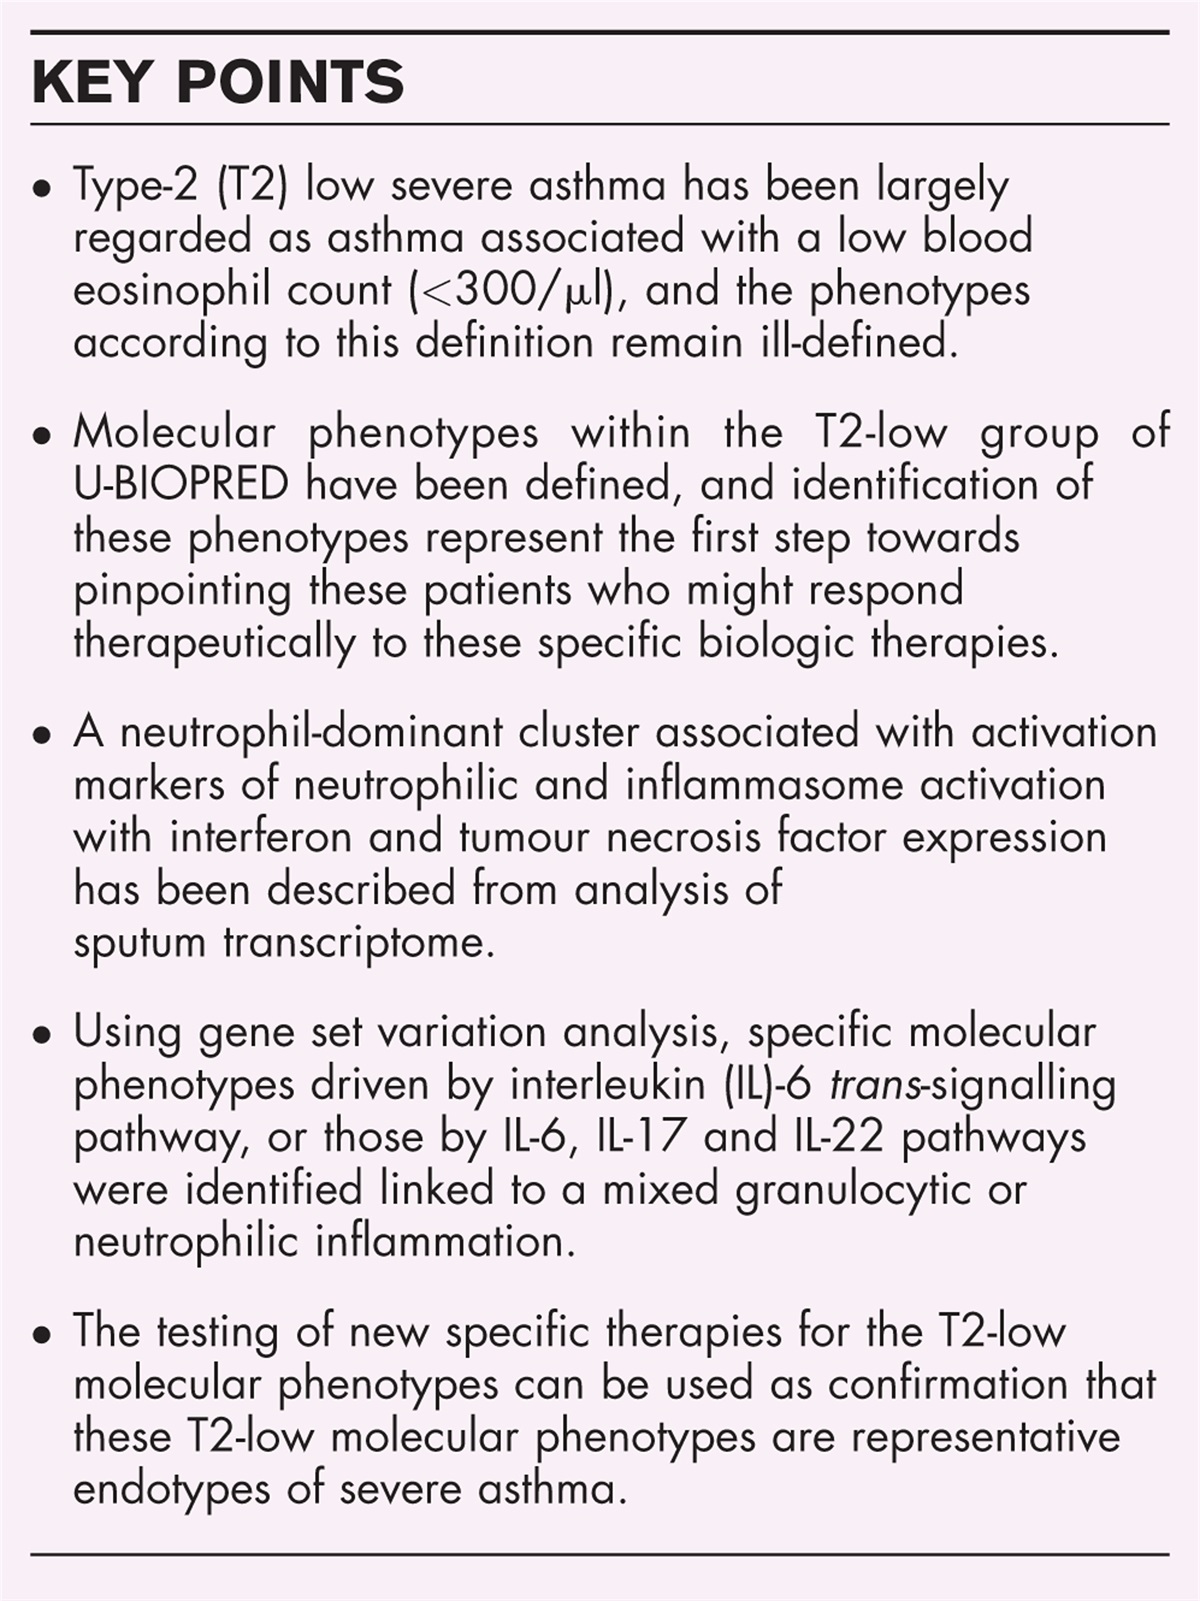 Type-2-low severe asthma endotypes for new treatments: the new asthma frontier